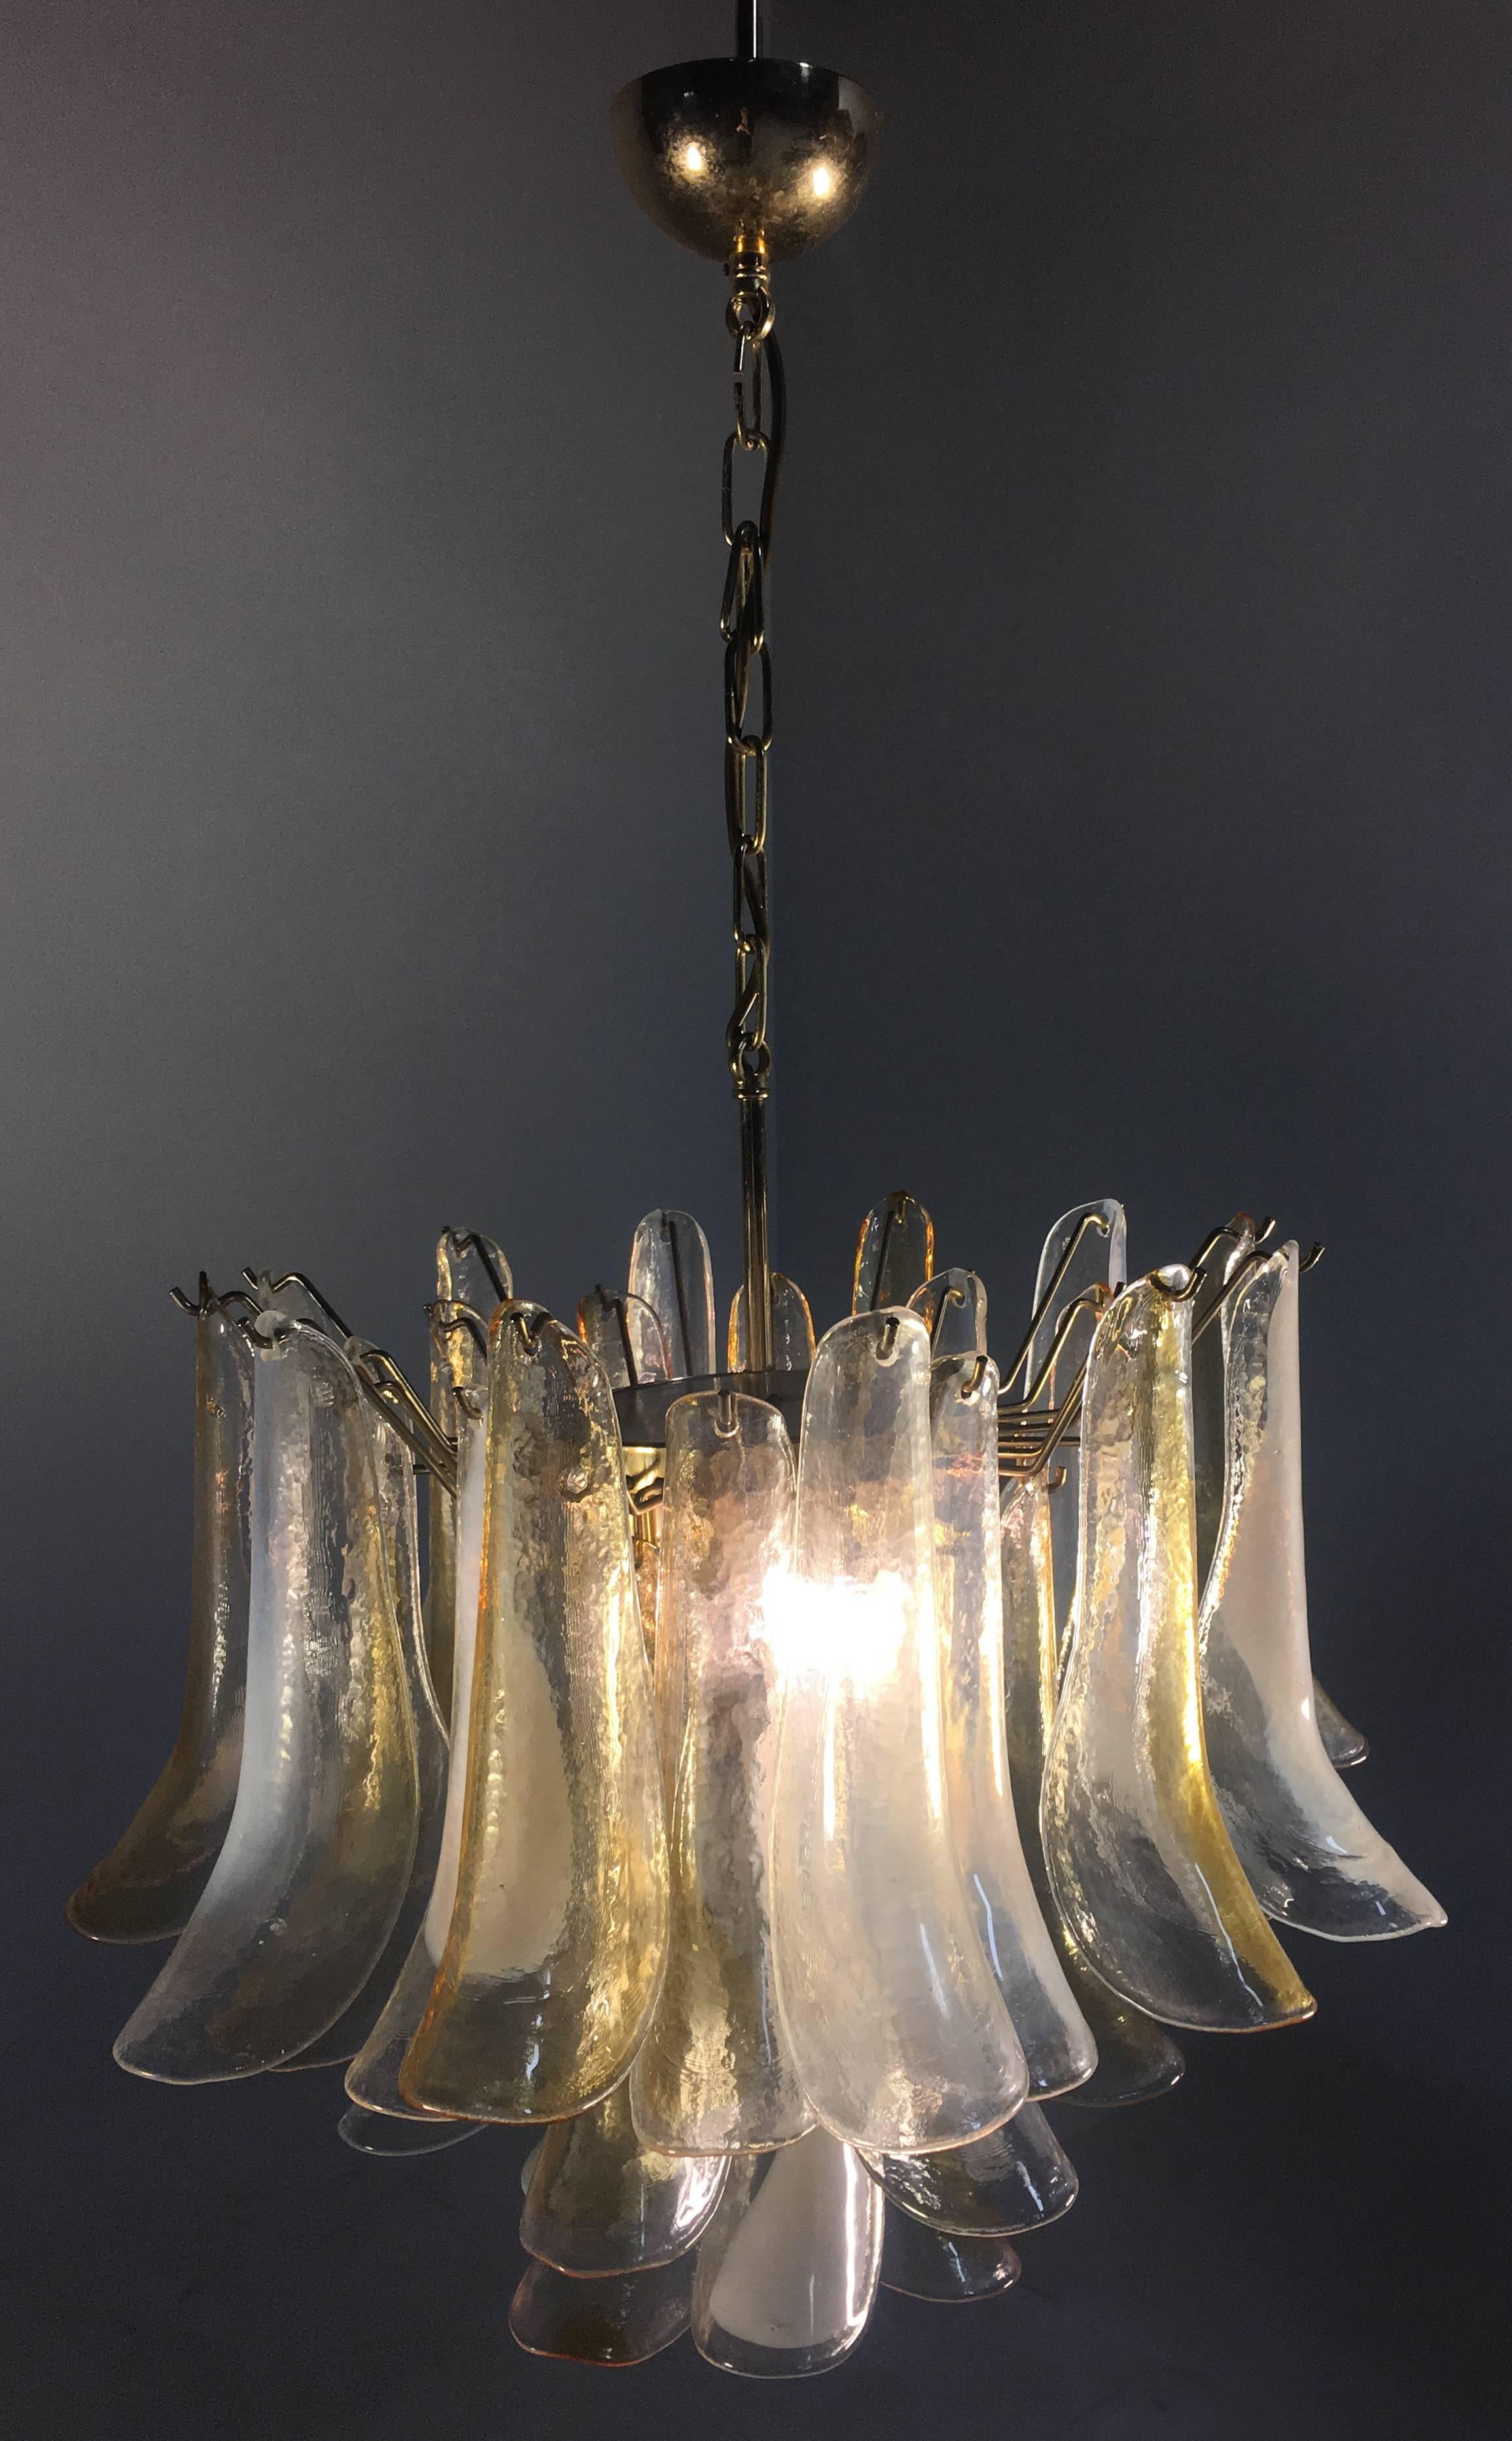 Elegant Pair of Chandeliers White and Amber Petals, Murano, 1990s For Sale 10